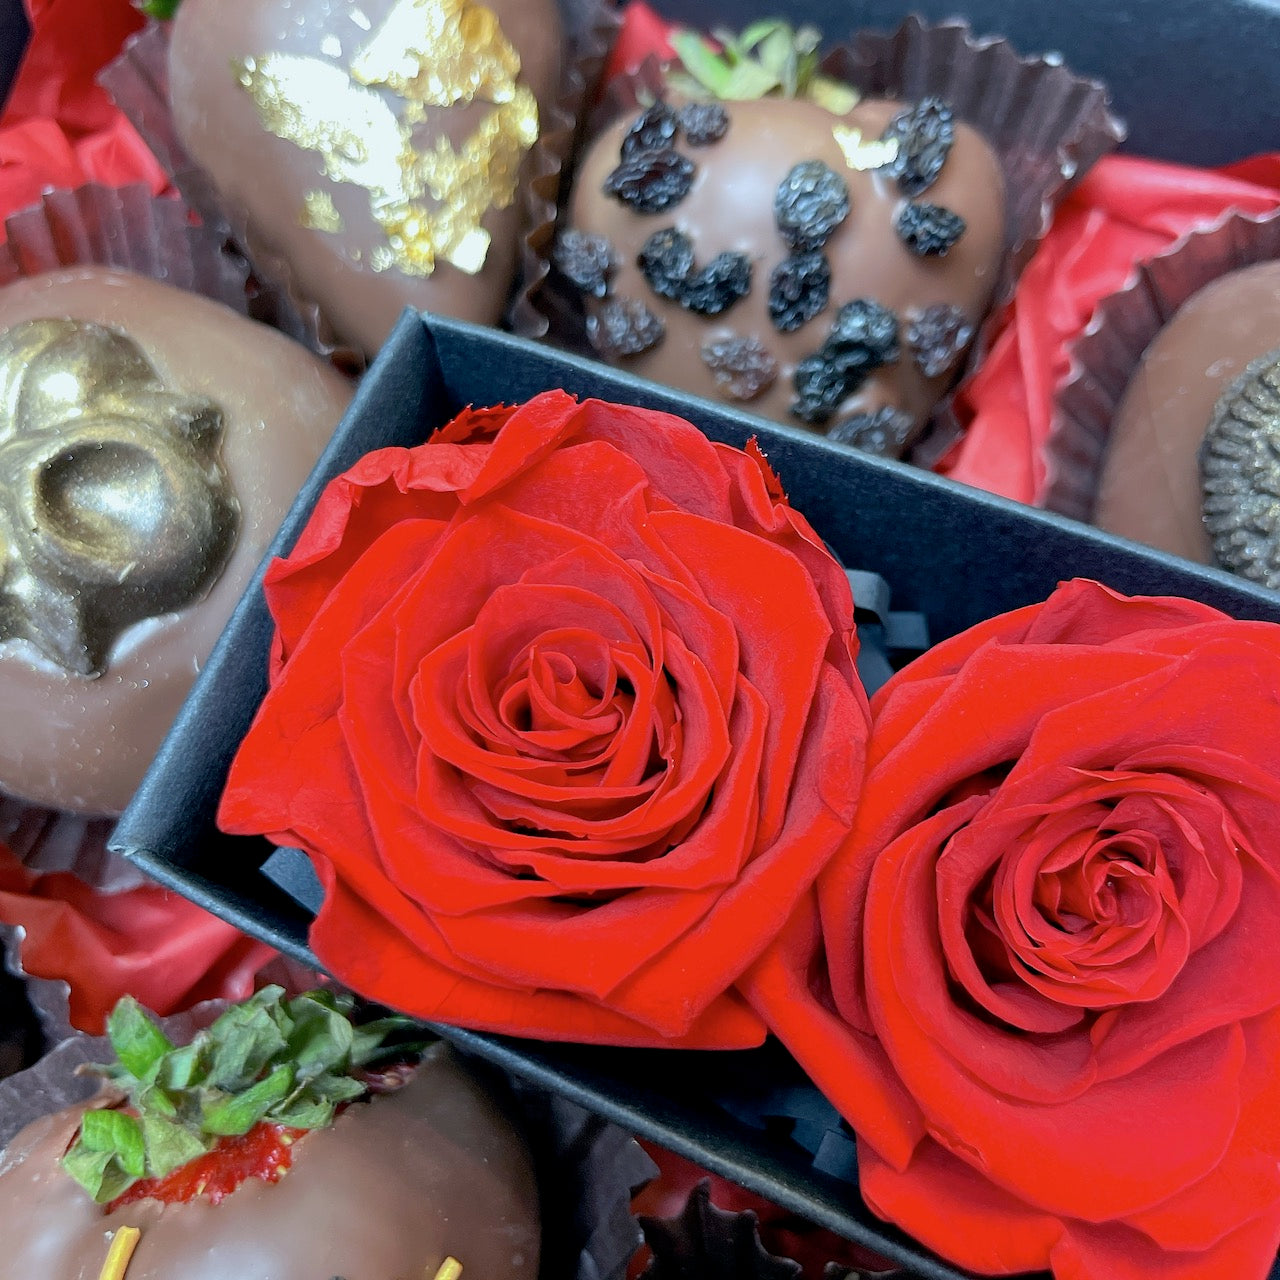 Valentine’s day, flowers delivery in Adelaide, Chocolate Roses delivery Australia , chocolate strawberries, Valentine’s Day gift ideas, gift ideas, vday gifts